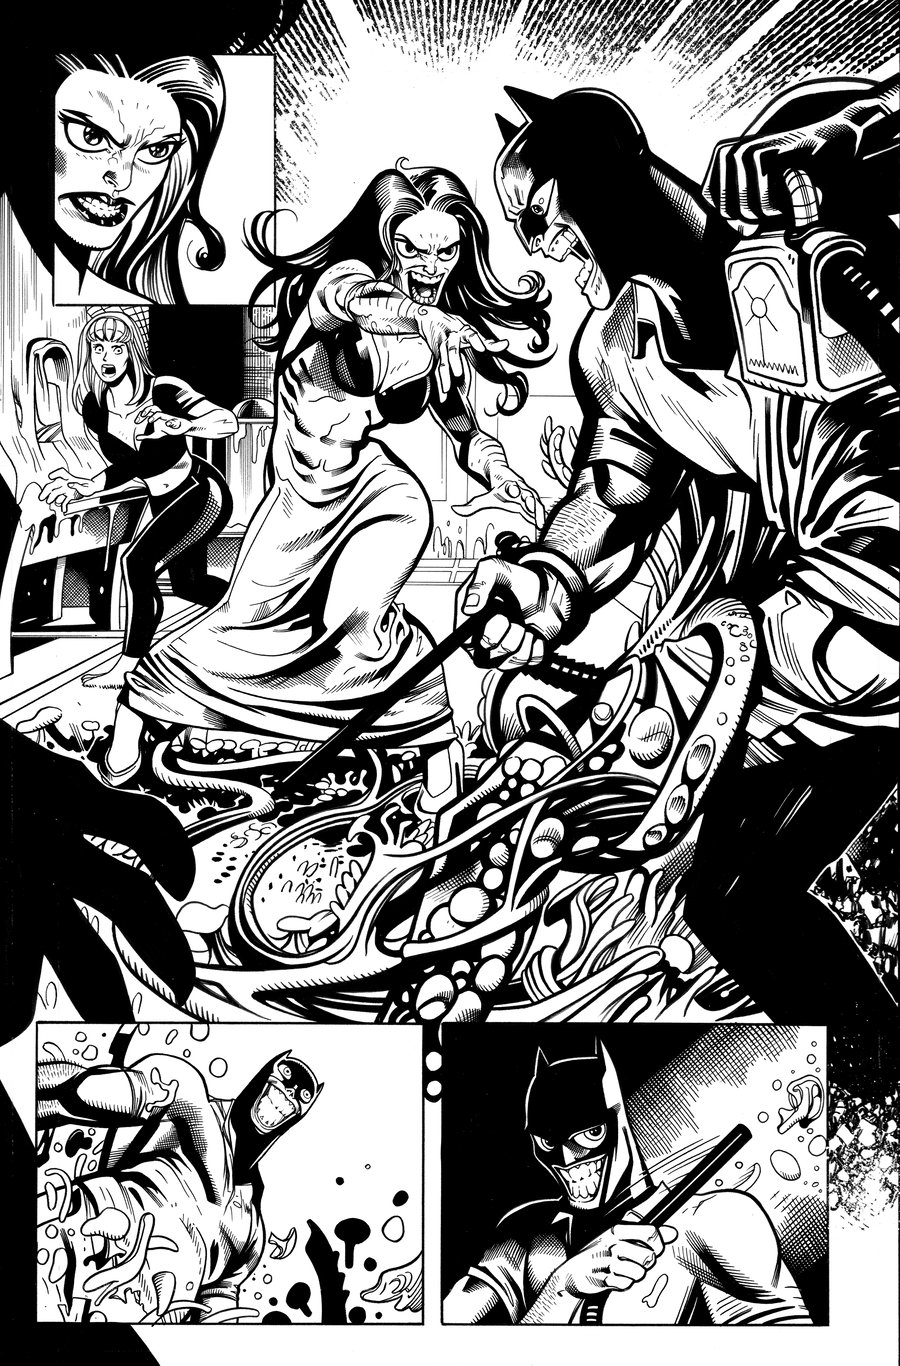 Image of Knight Terrors: Poison Ivy #2 PG 18